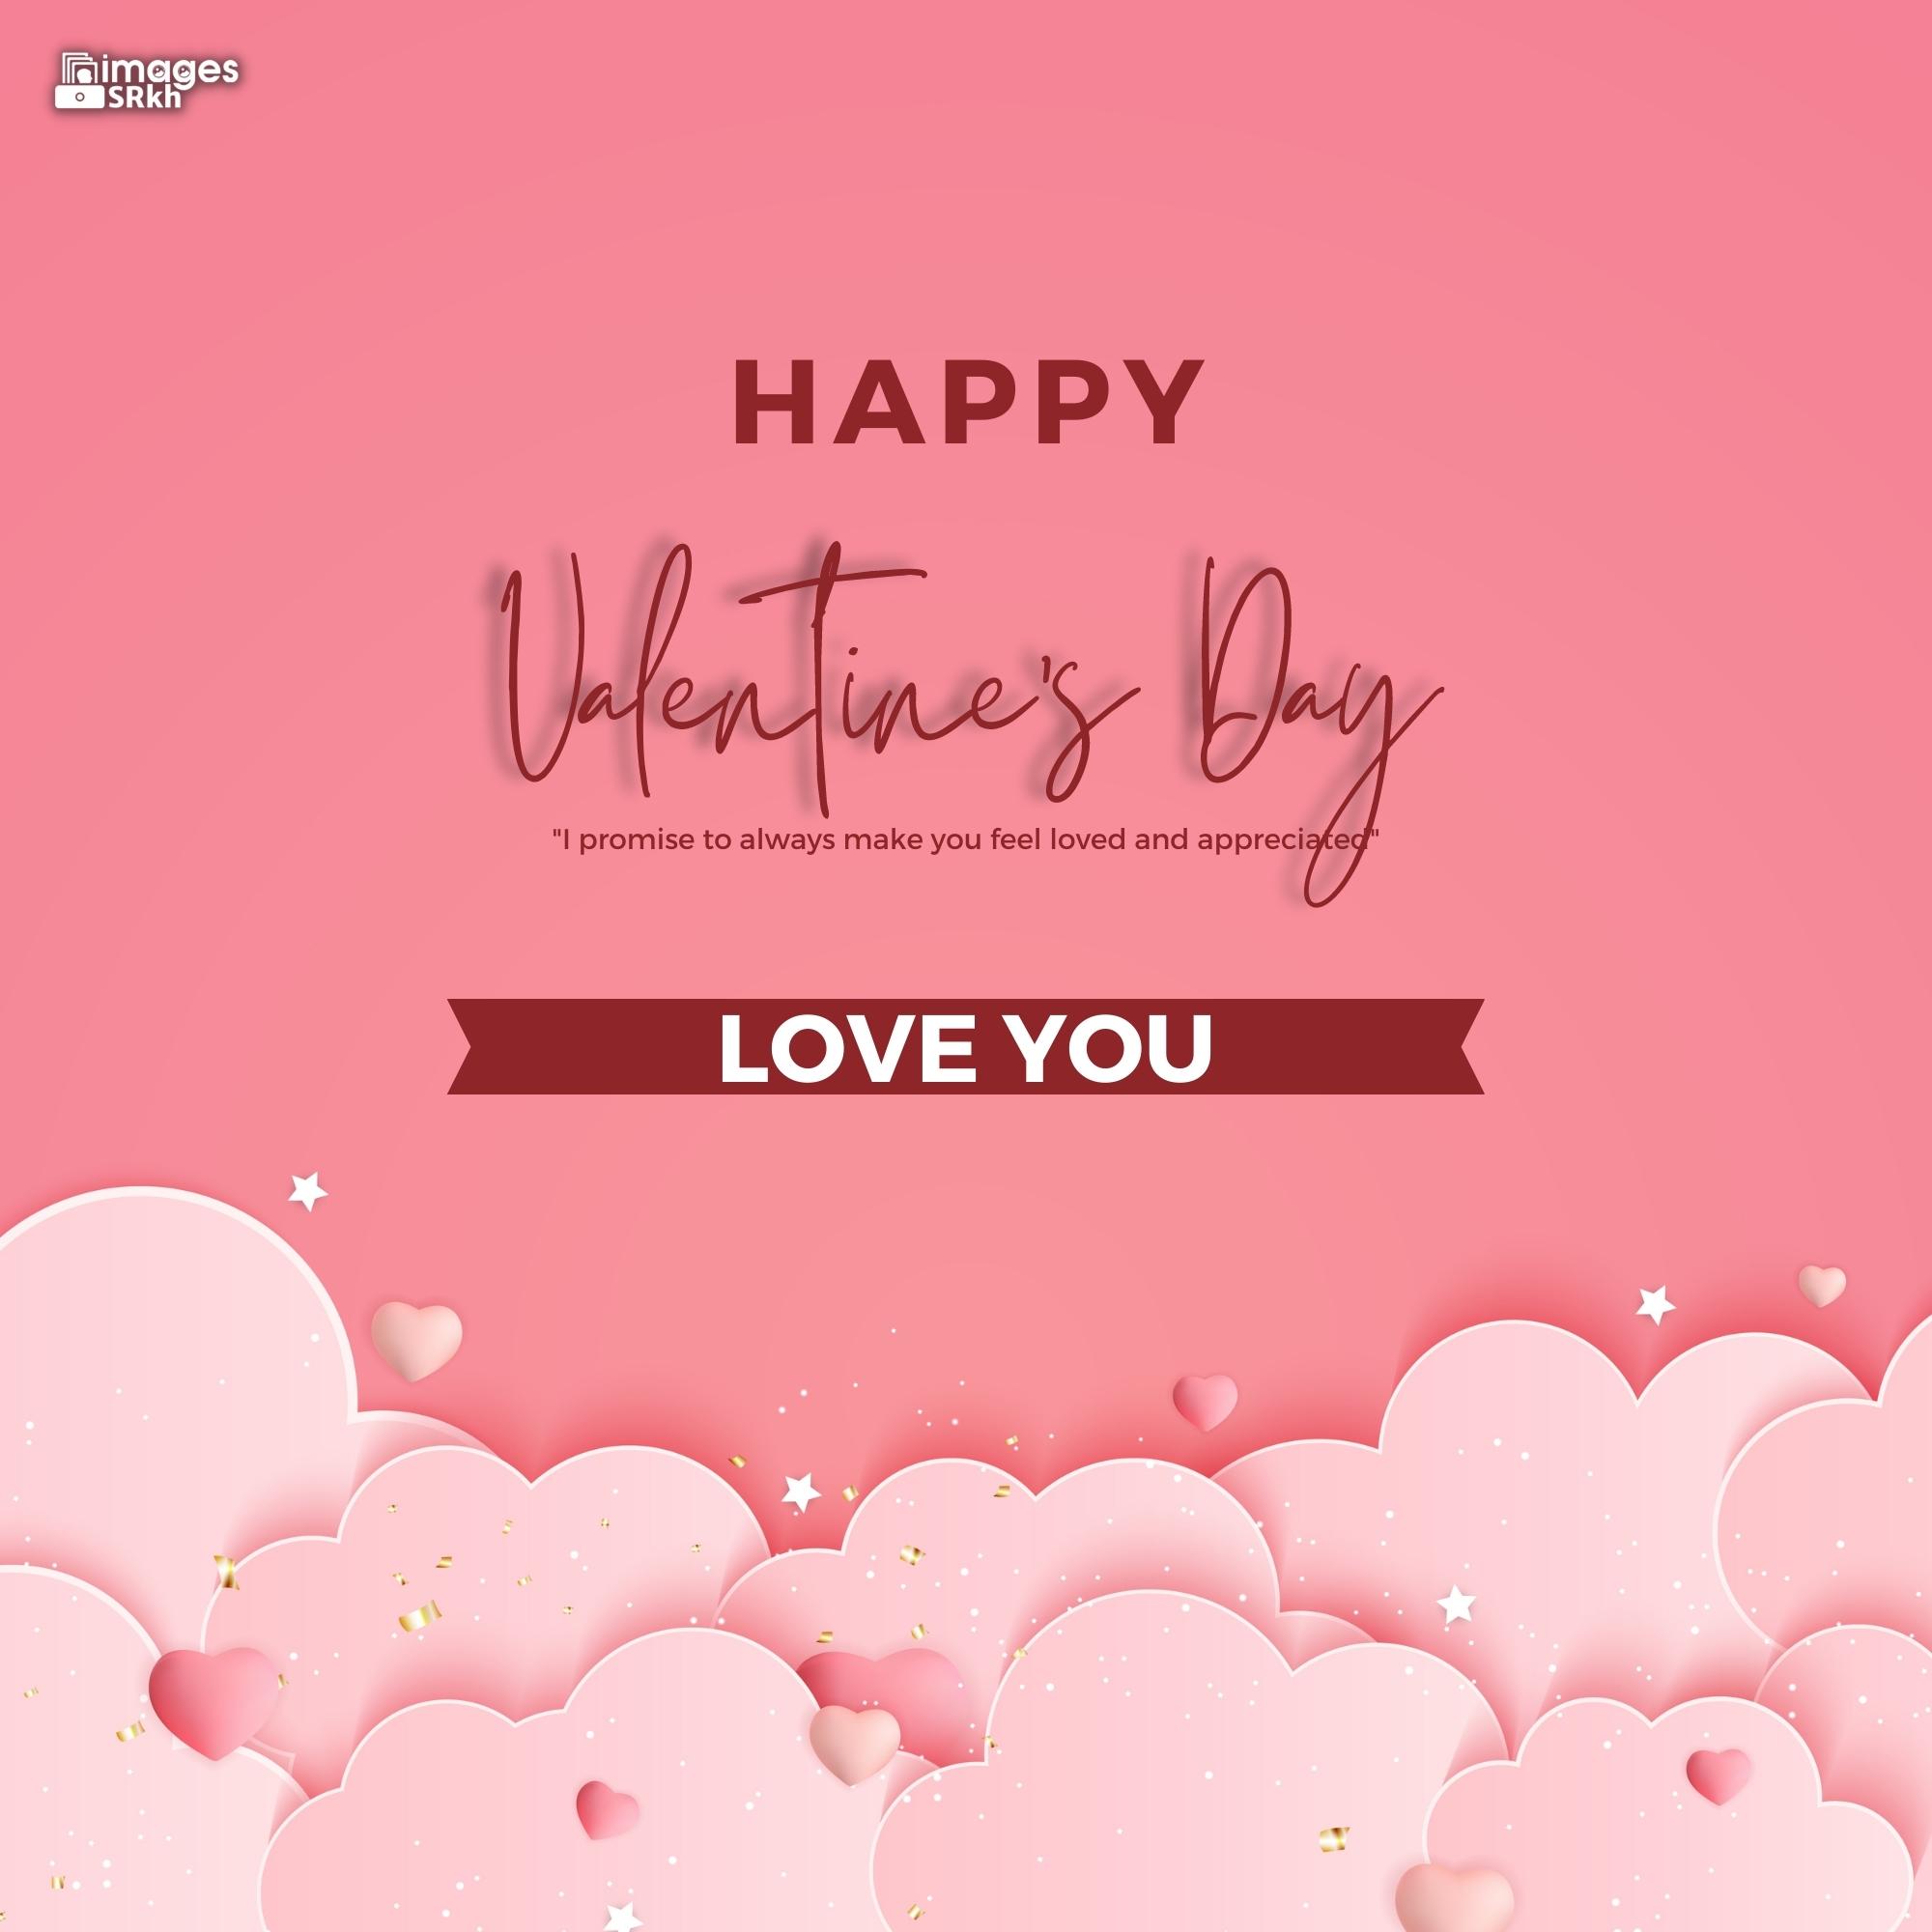 Happy Valentines Day | 500 | PREMIUM IMAGES | Wishes for Love